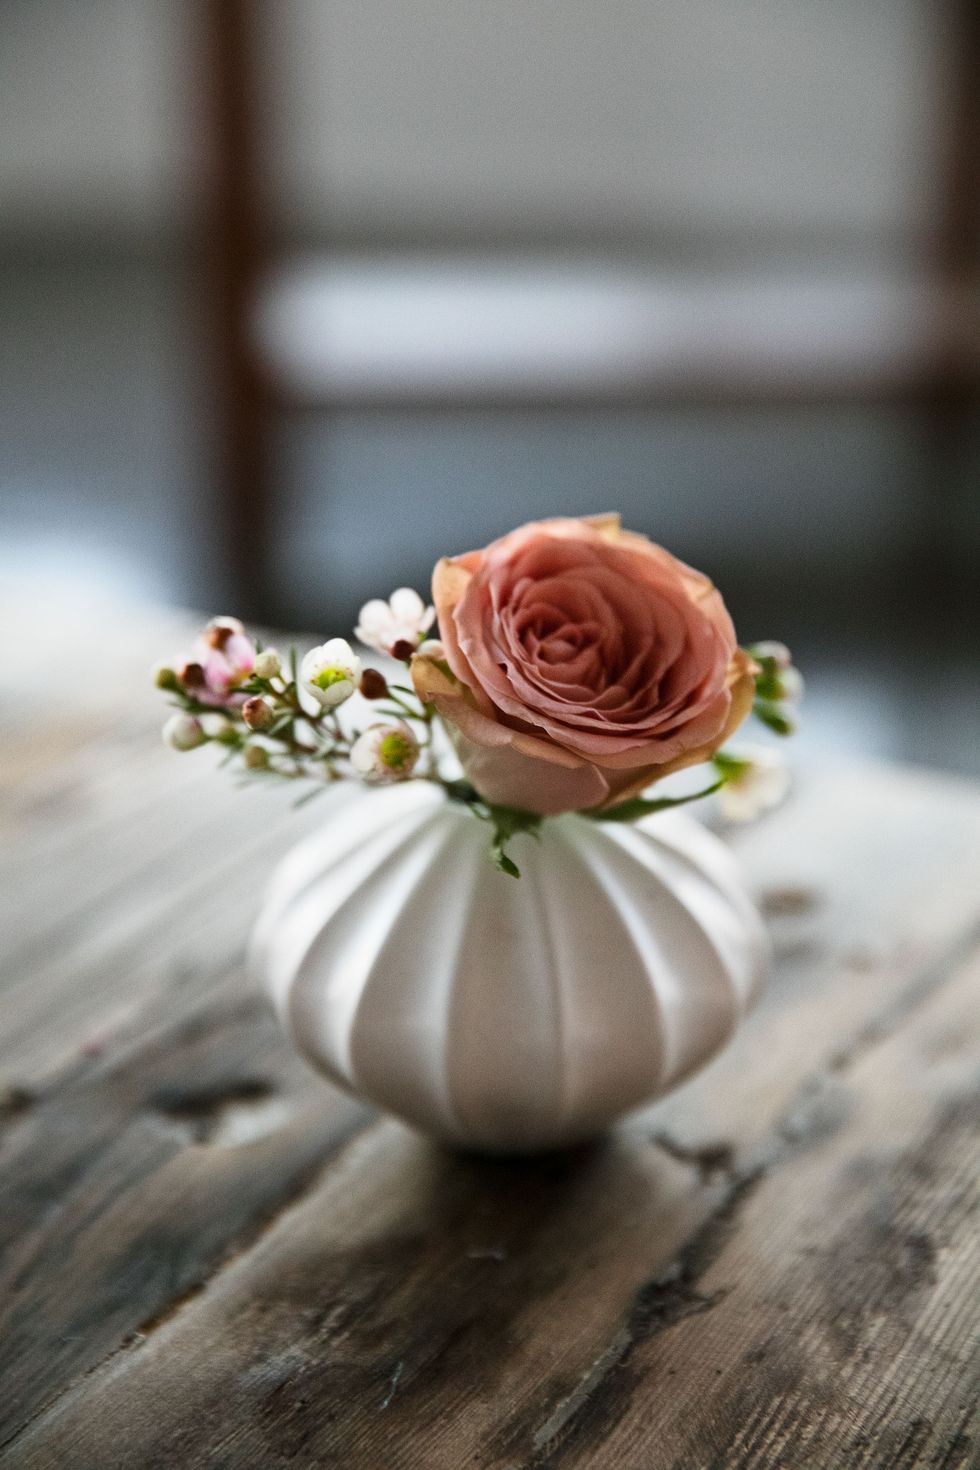 DIY Wedding Flower Kits that Are On-Trend and Unbelievably